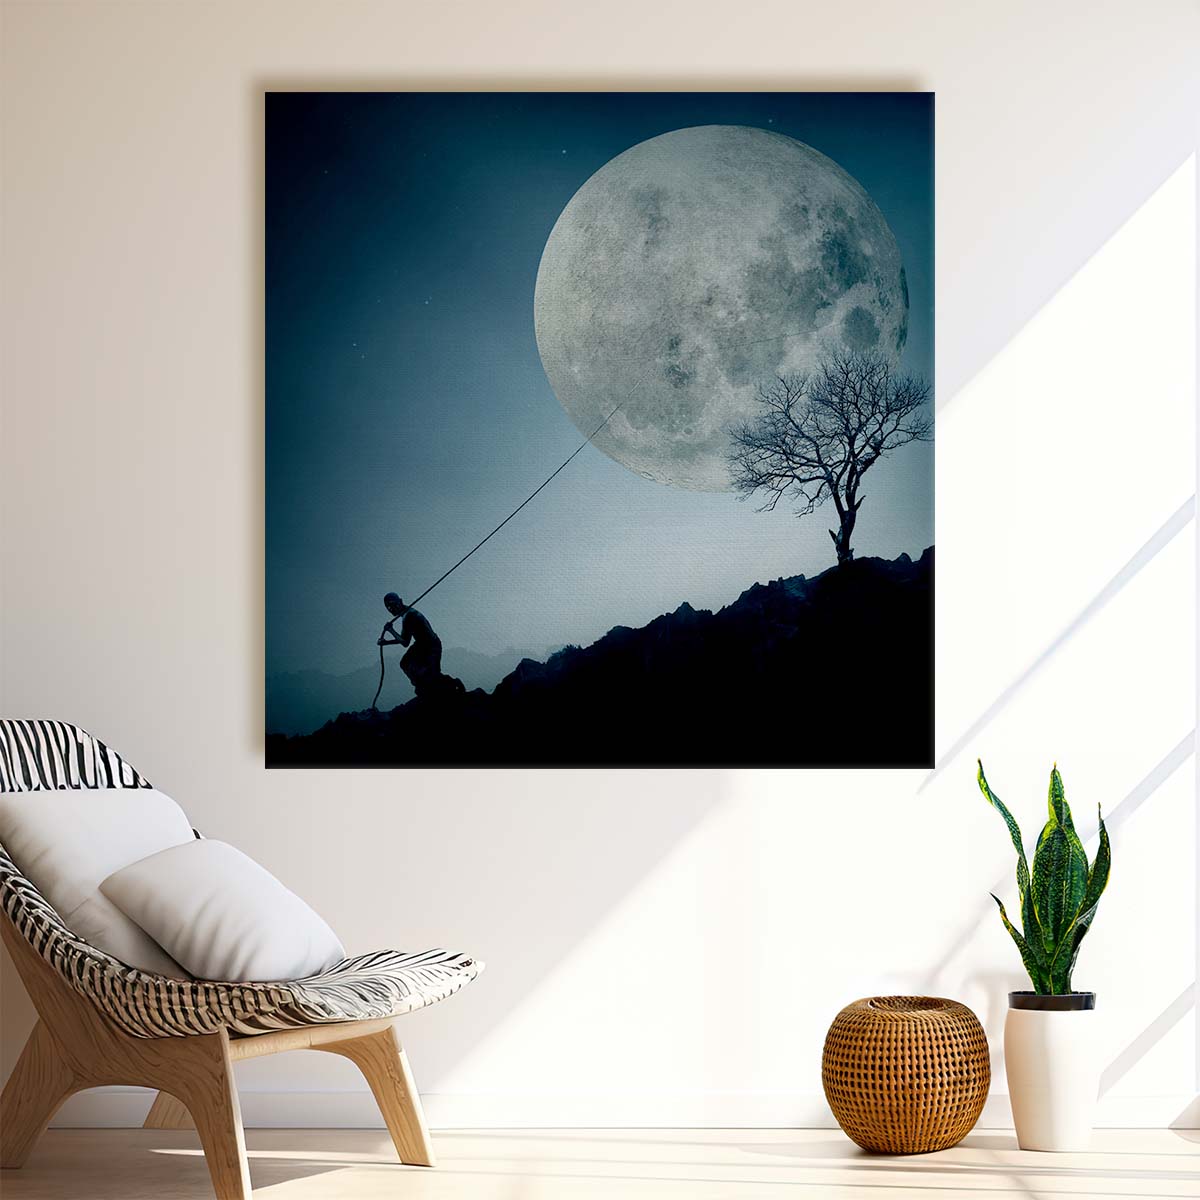 Astronomical Moonrise Silhouette Surreal Landscape Photography Wall Art by Luxuriance Designs. Made in USA.